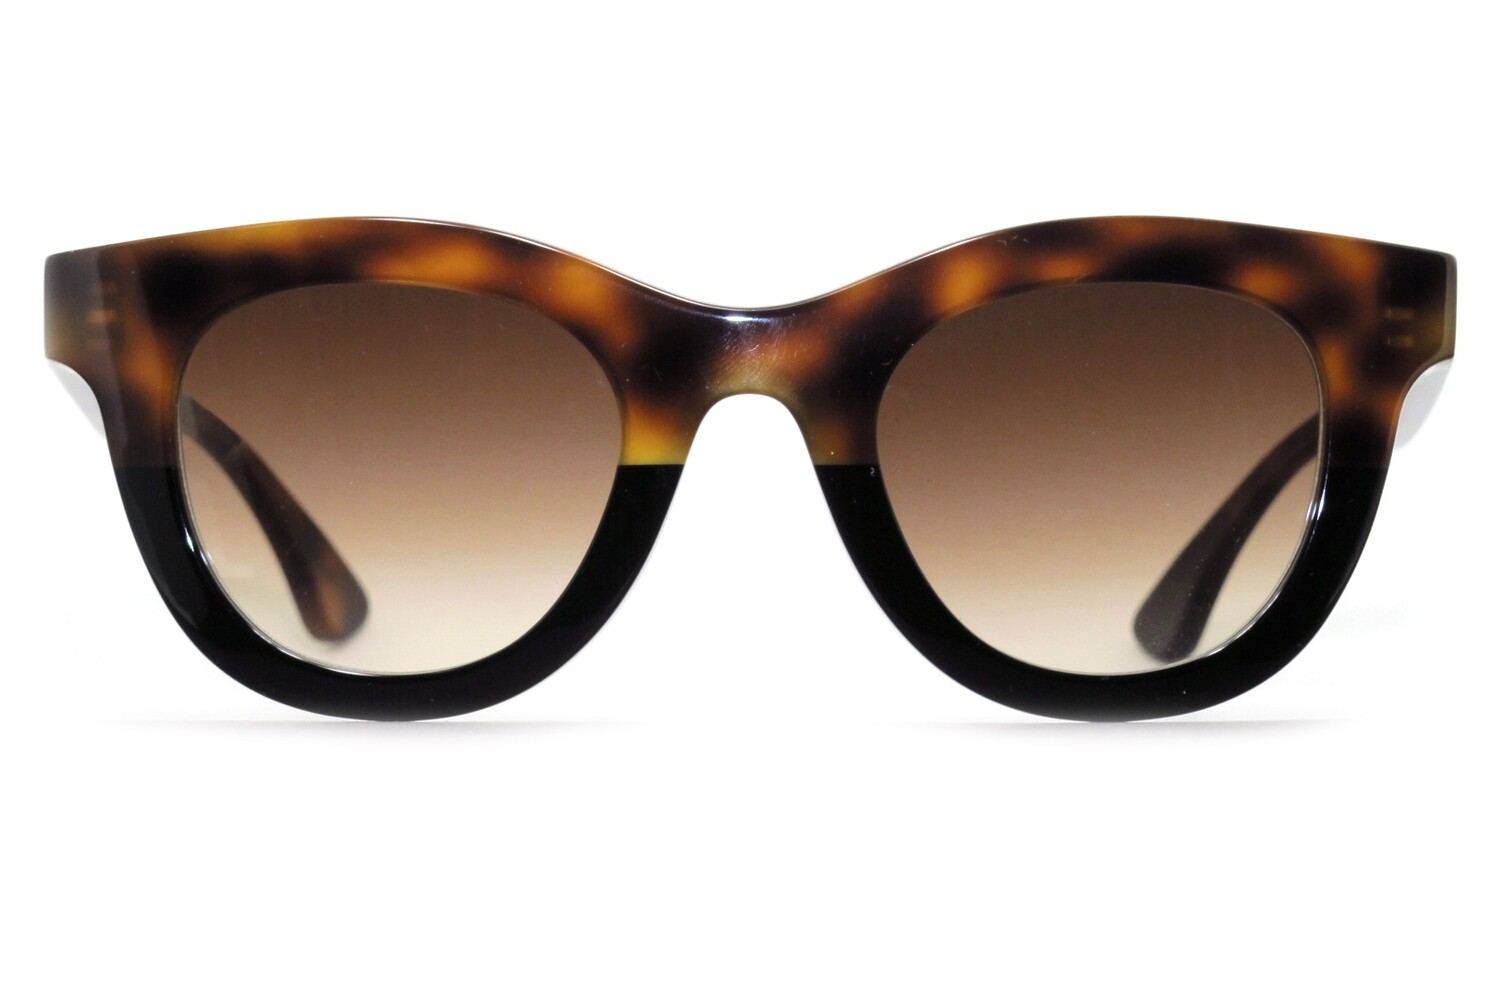 Consistency by Thierry Lasry